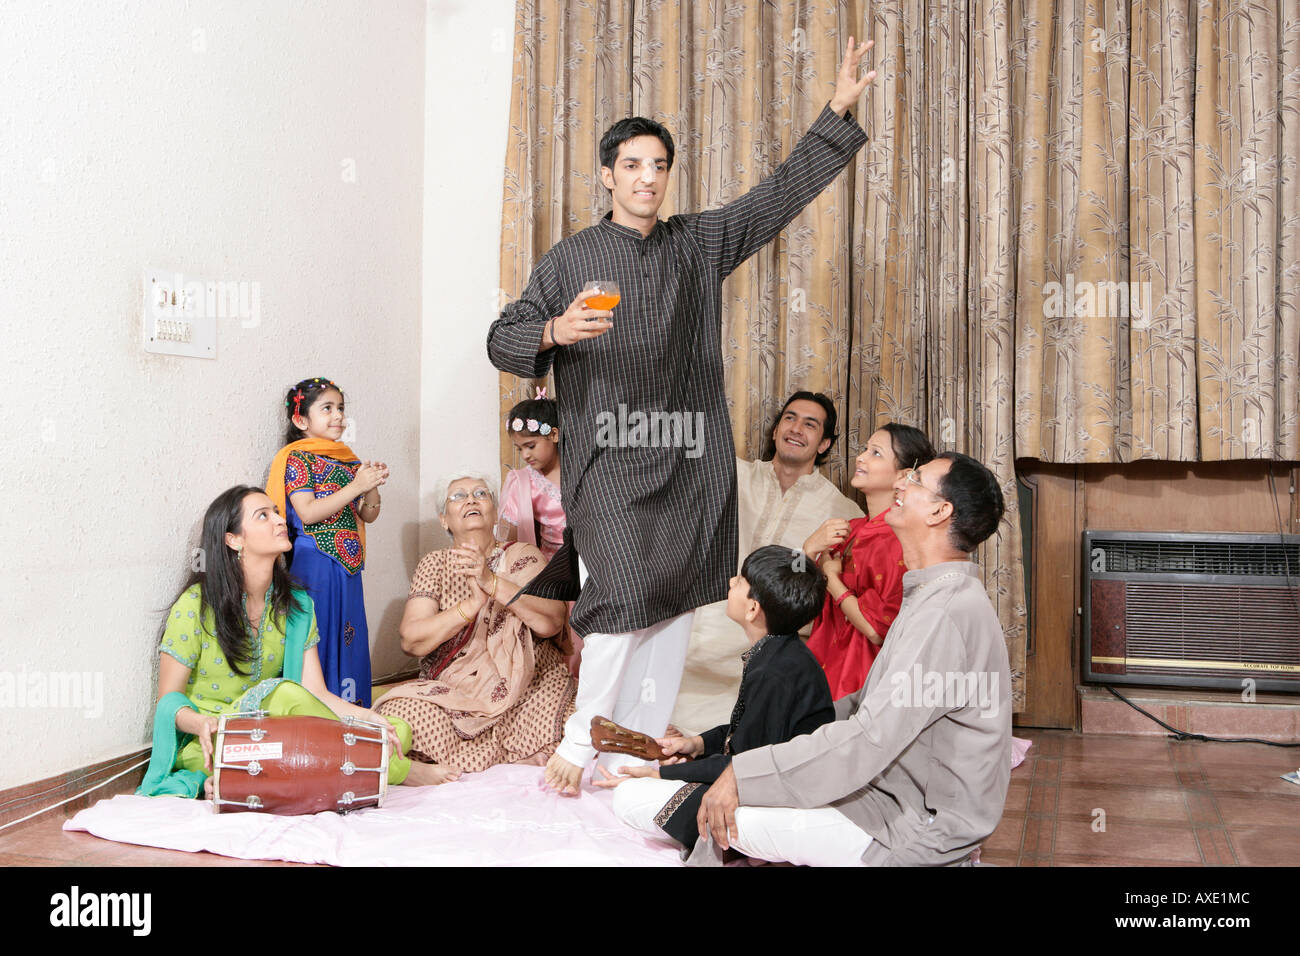 Man dancing with his family sitting around him Stock Photo